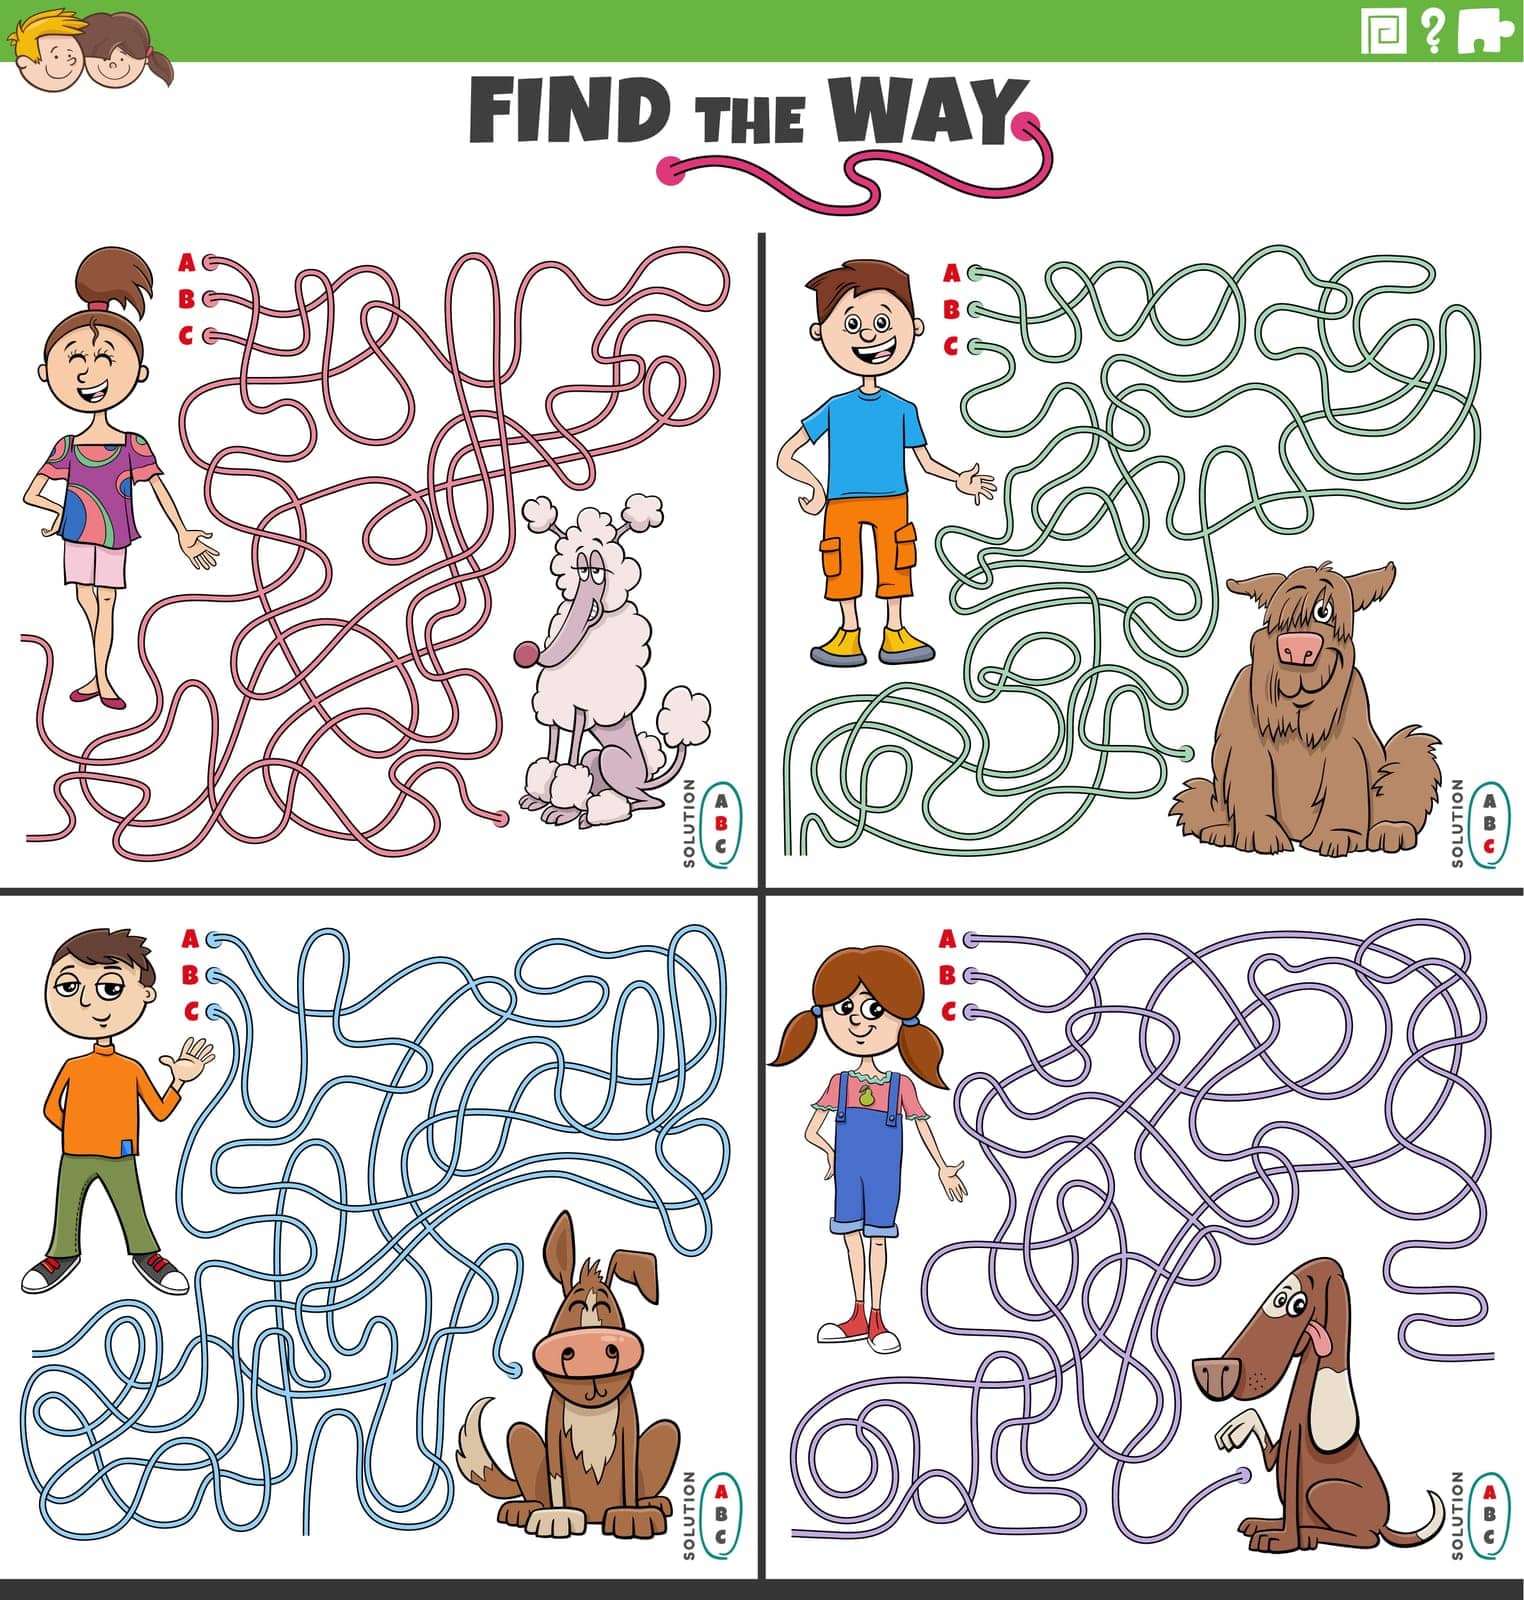 Cartoon illustration of find the way maze puzzle activities set with children or teens with their dogs